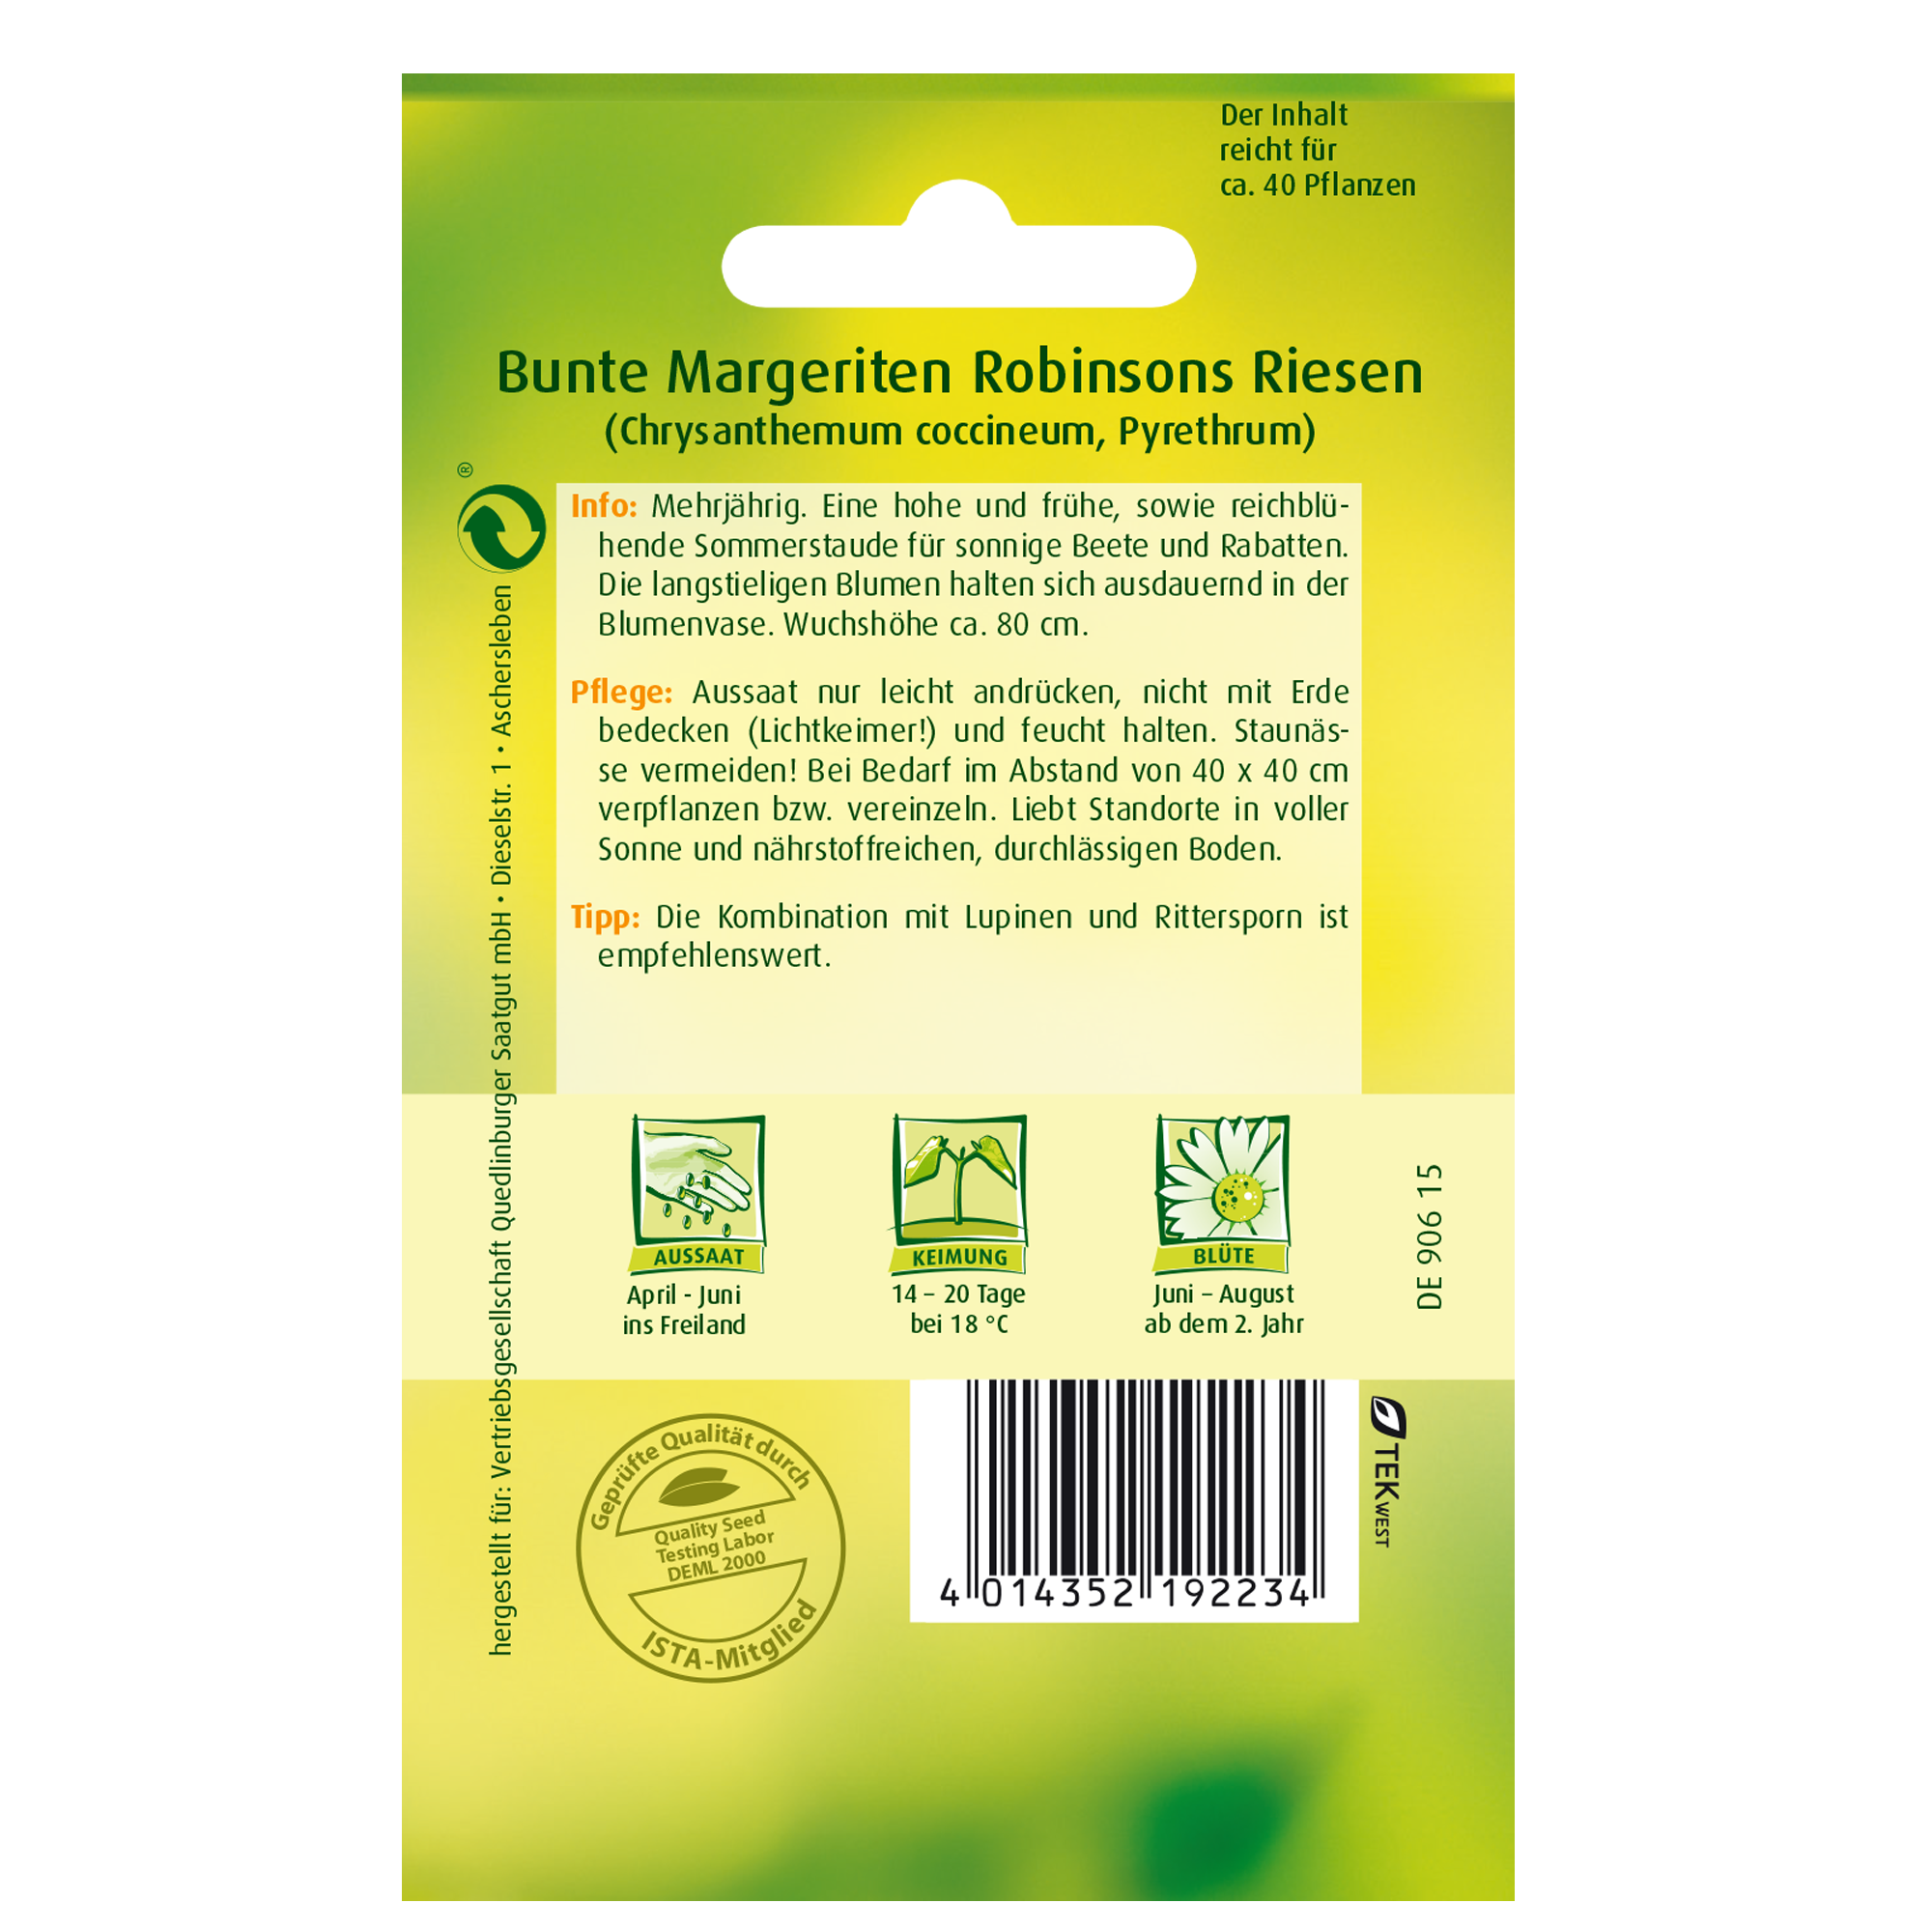 Bunte Margeriten 'Robinsons Riesen' + product picture